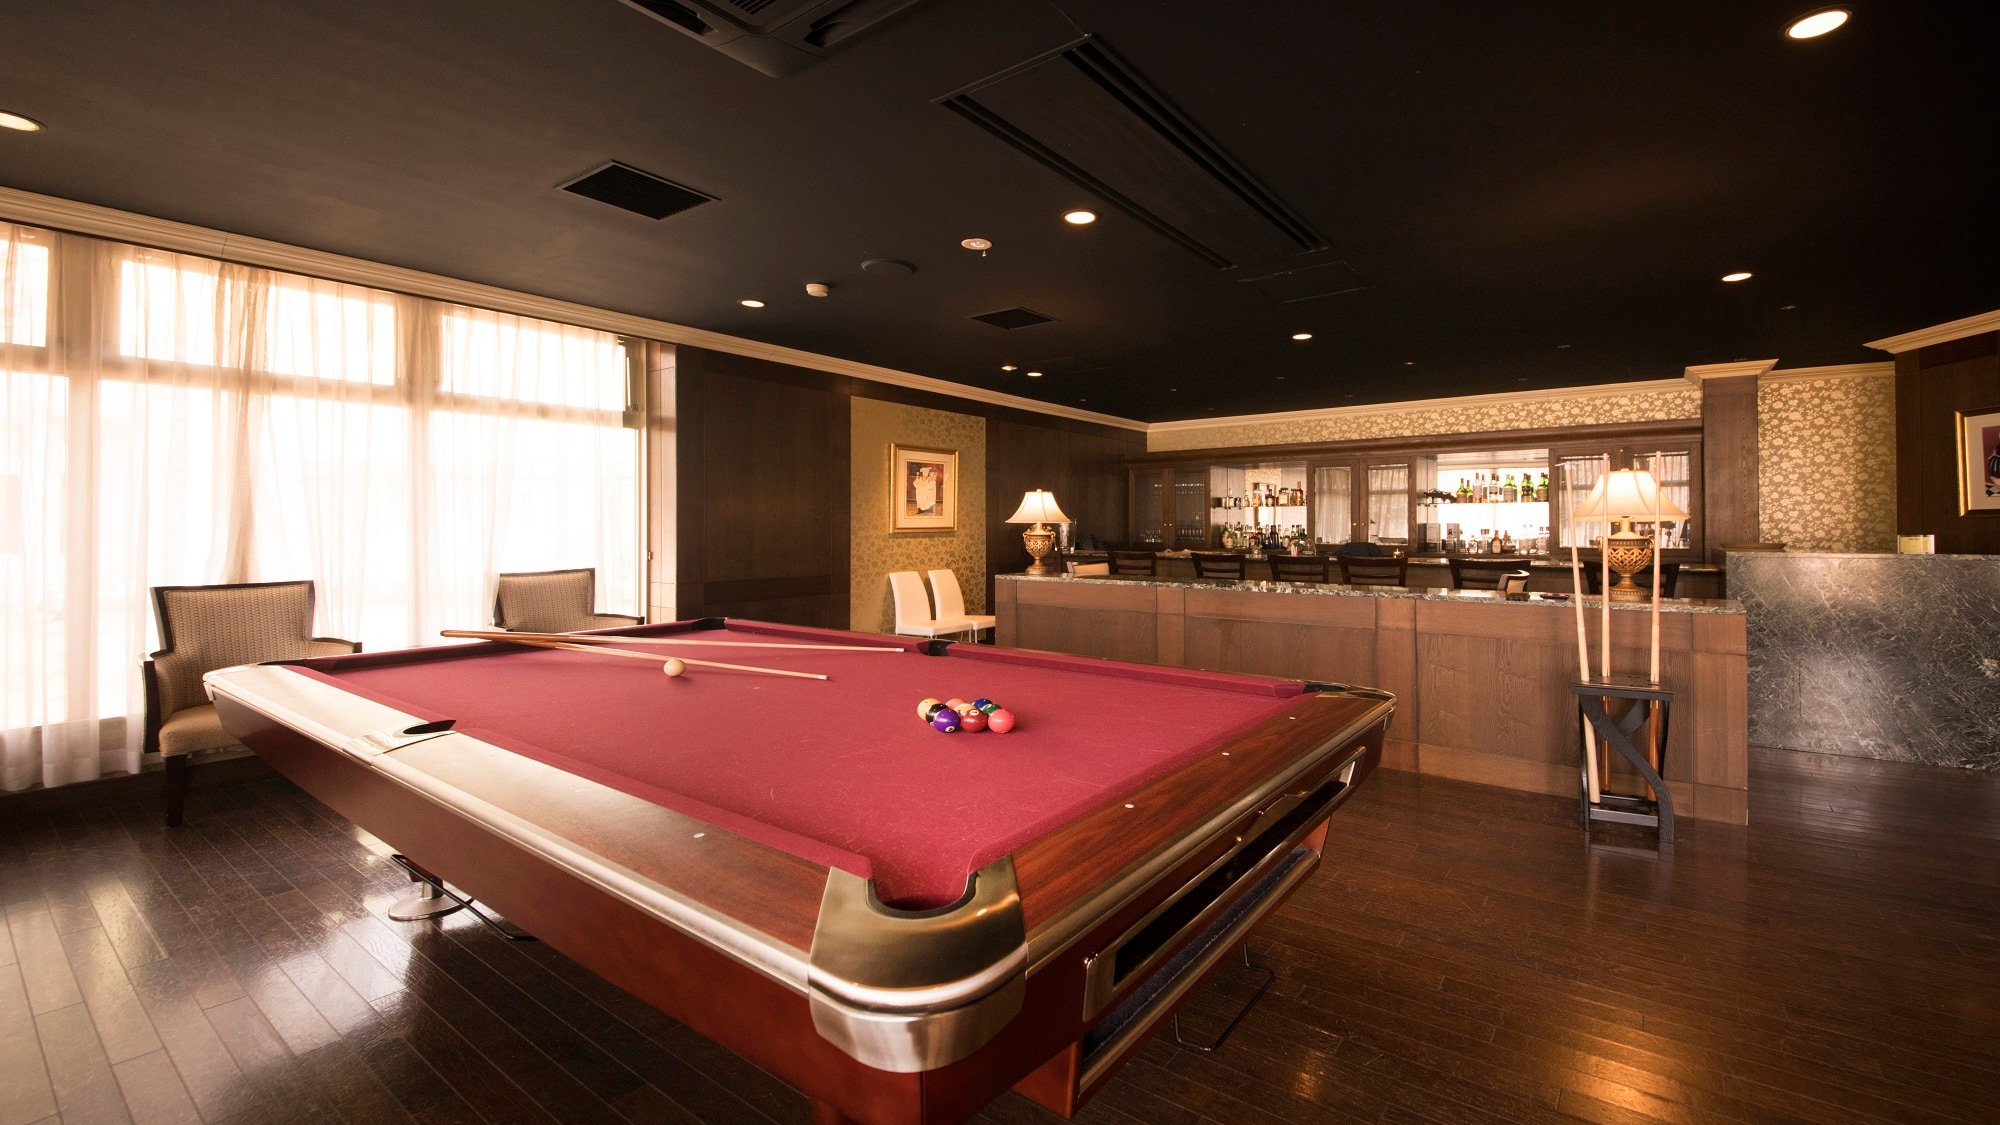 ■ "Lounge" billiards can be used freely.